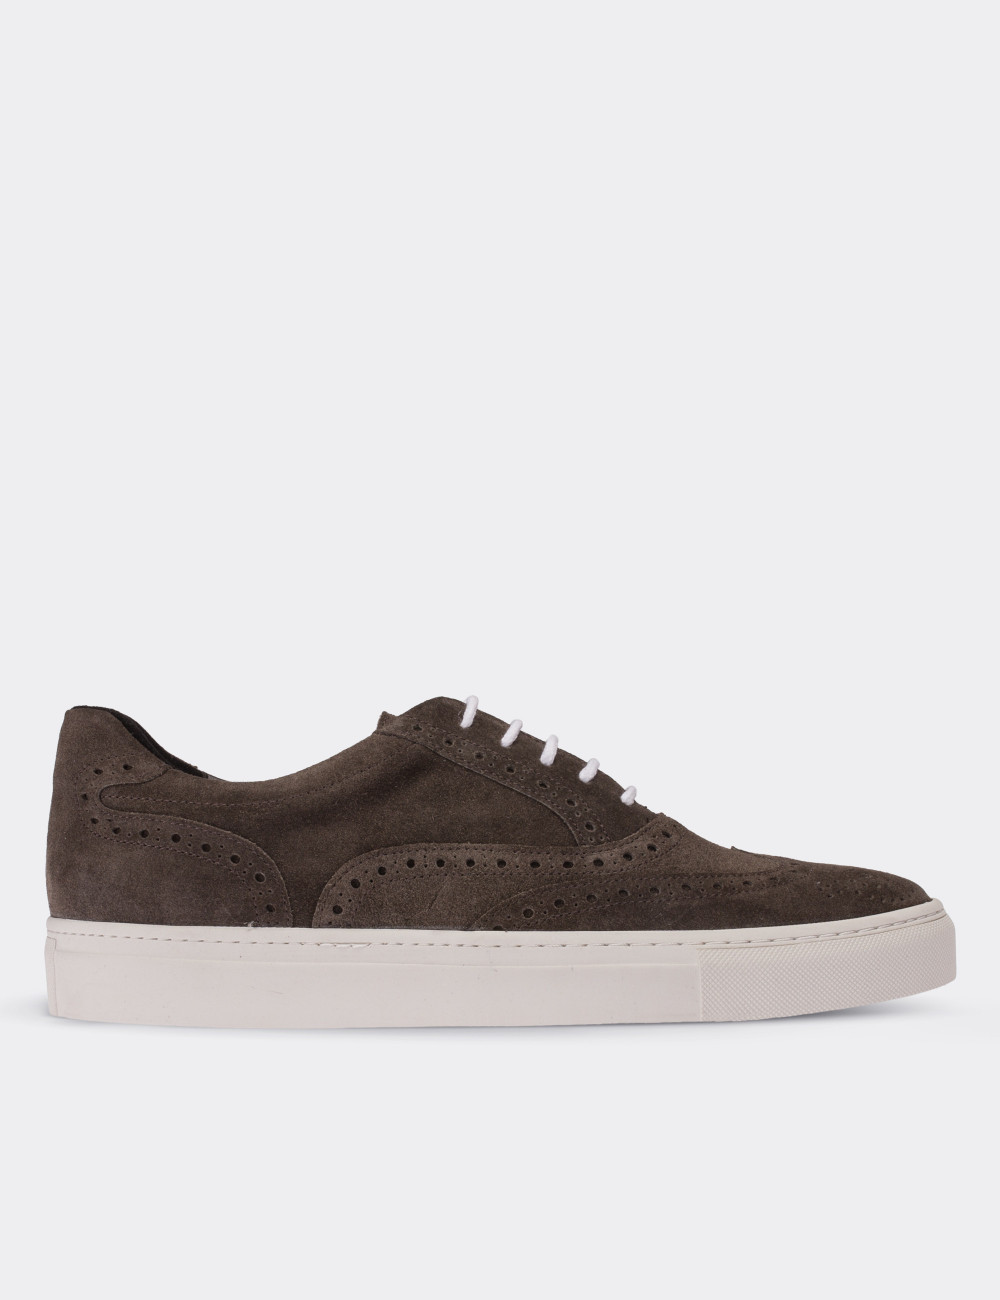 Green Suede Leather Sneakers - 01637MYSLC01